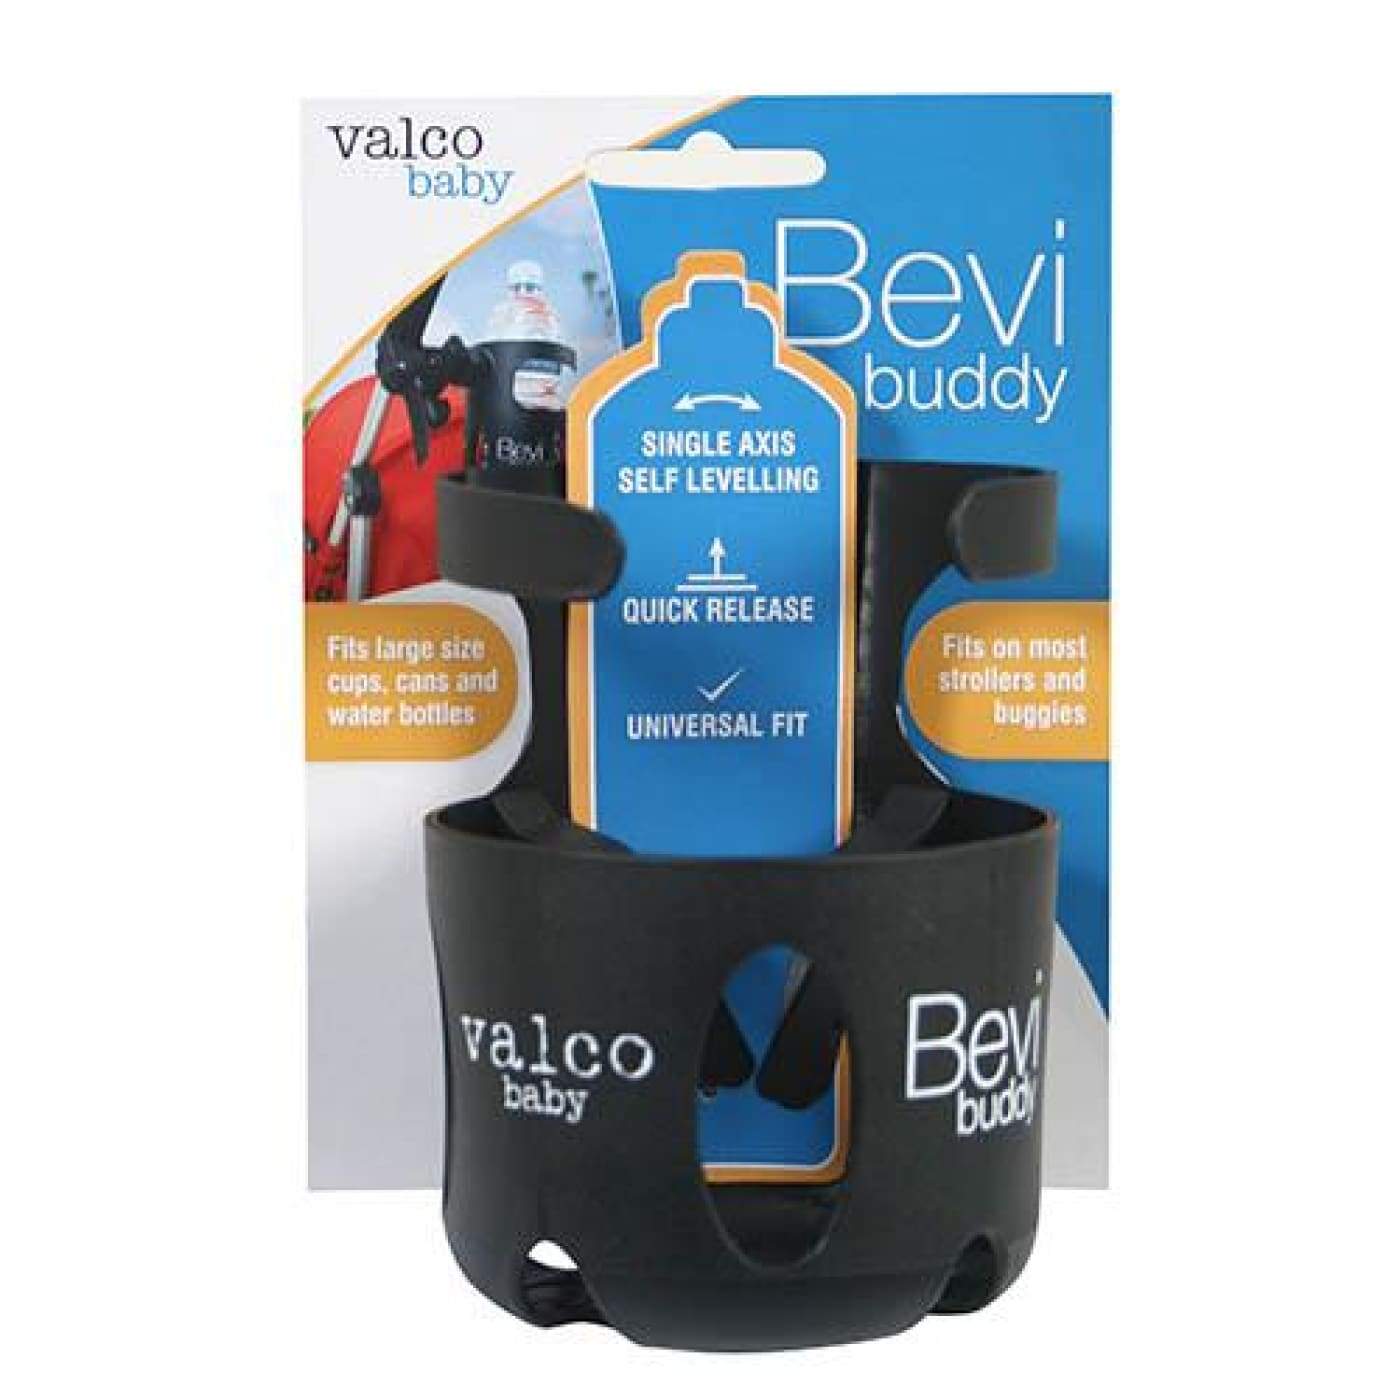 Valco Baby Drink Bottle Holder Universal Bevi Buddy - PRAMS & STROLLERS - CUP/PHONE HOLDERS/FANS